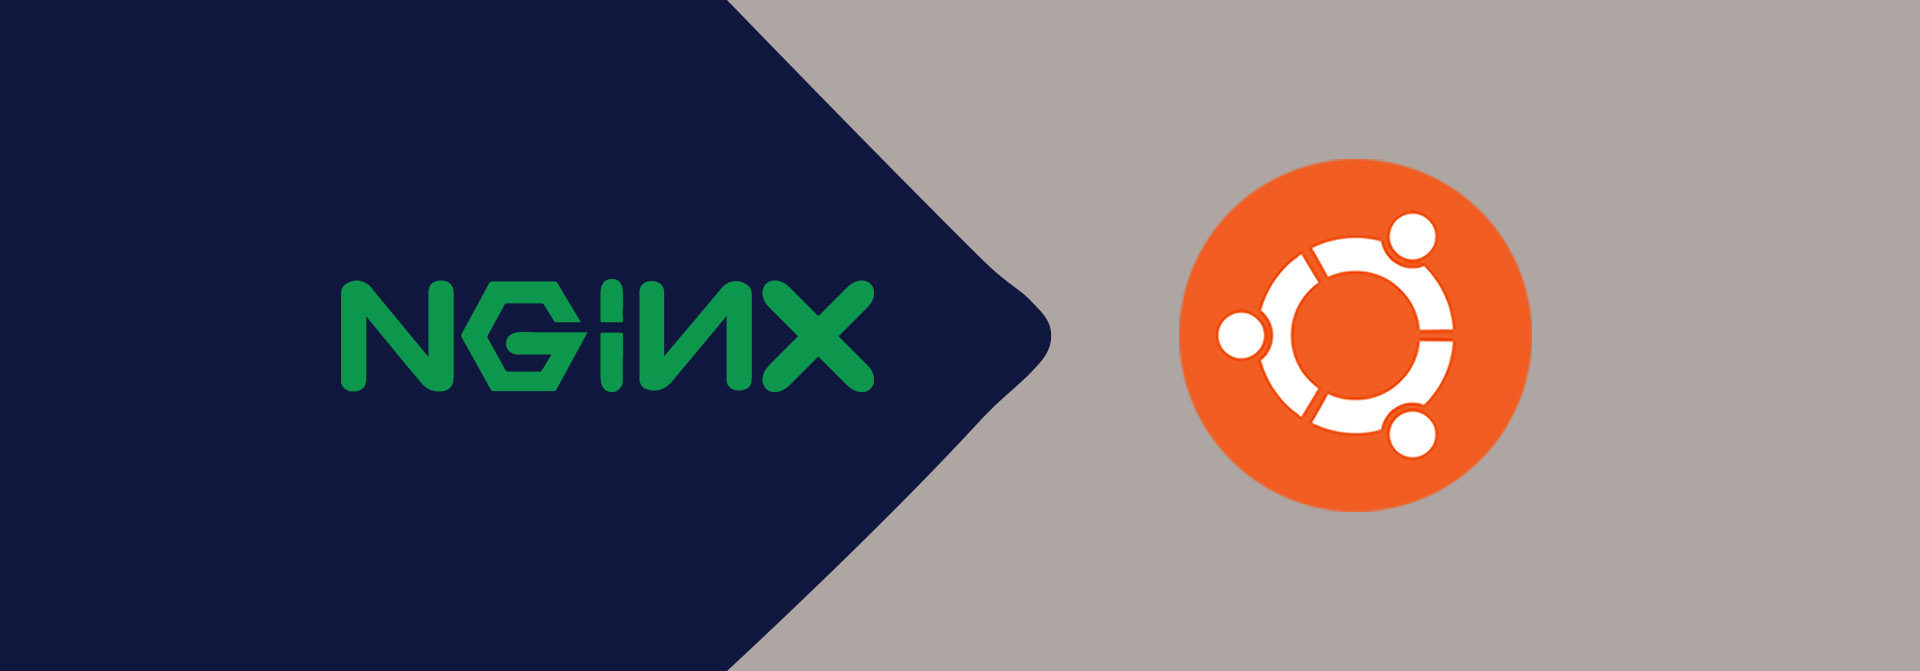 How To Install And Configure Nginx on Ubuntu 20.04 LTS